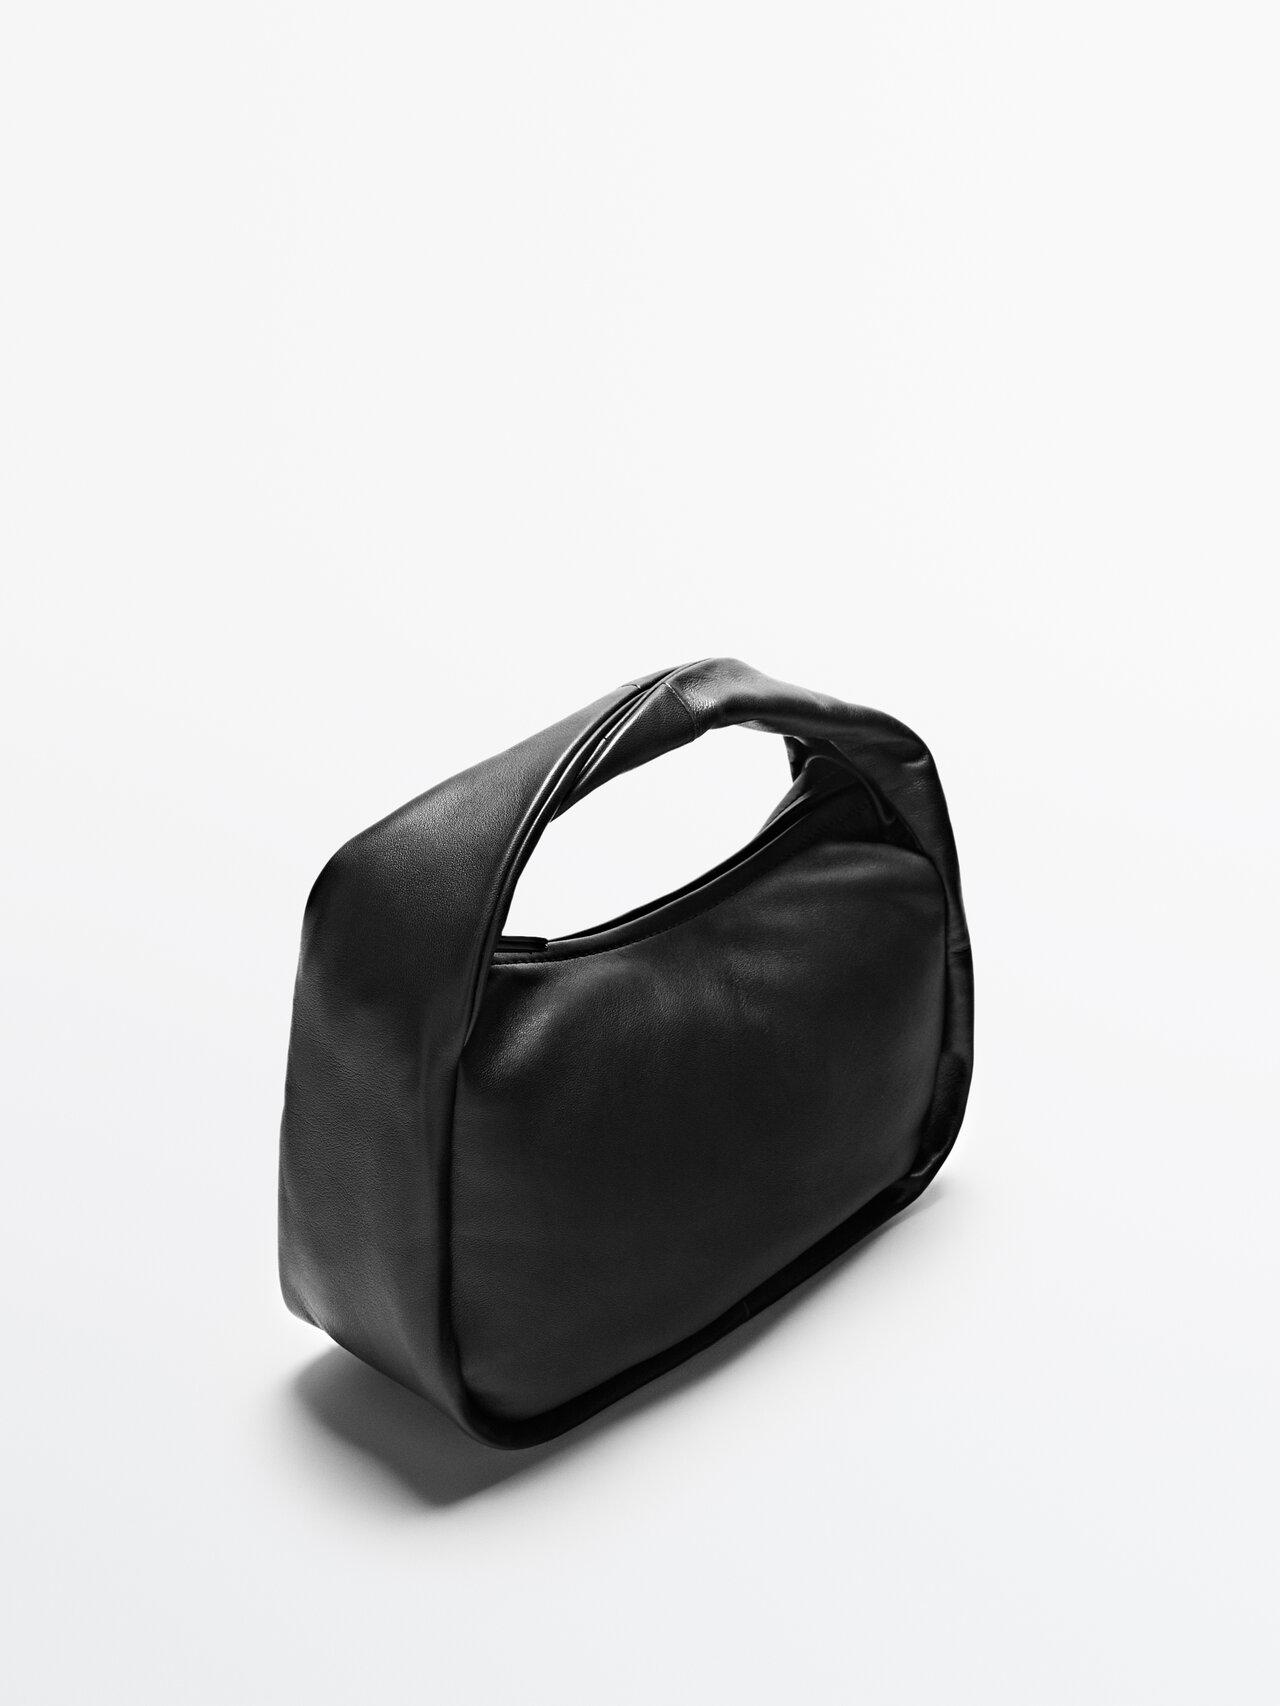 MASSIMO DUTTI Nappa Leather Shoulder Bag in Black | Lyst